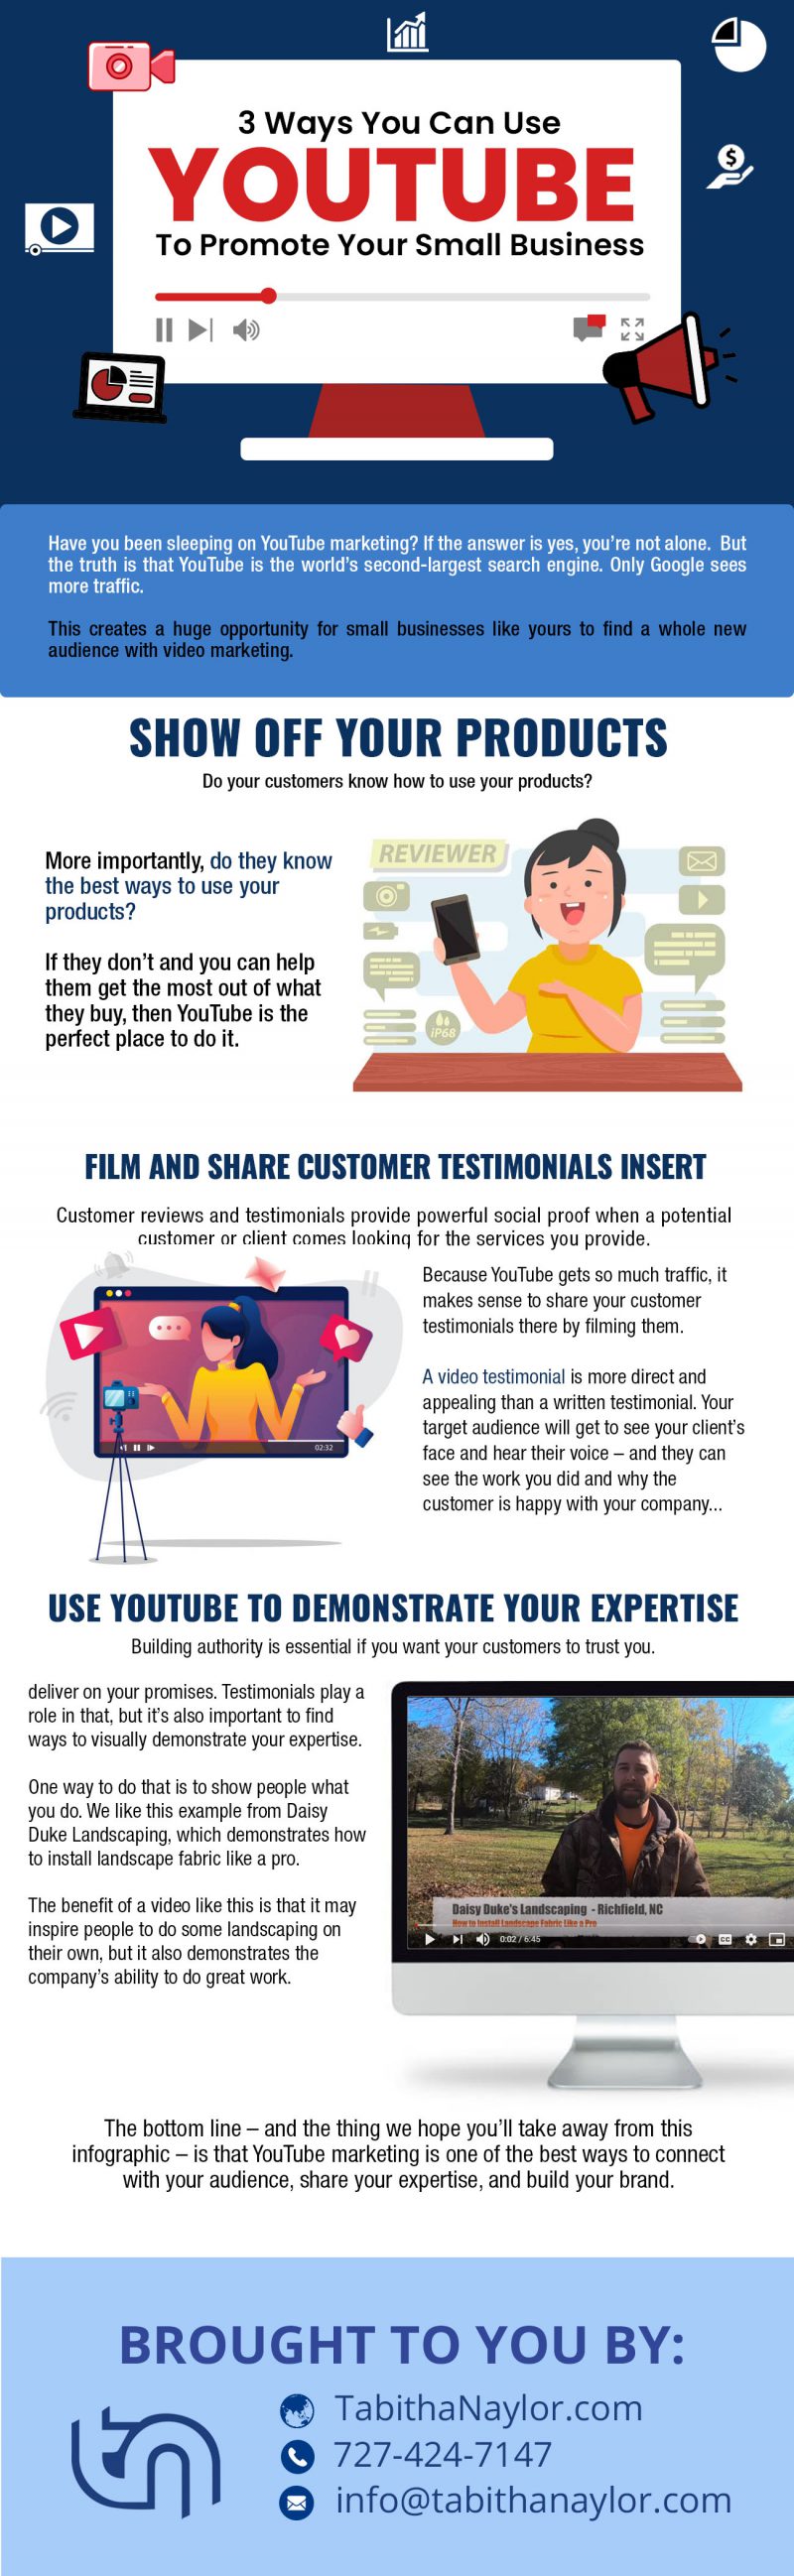 3-Ways-You-Can-Use-YouTube-to-Promote-Your-Small-Business-800x2596 